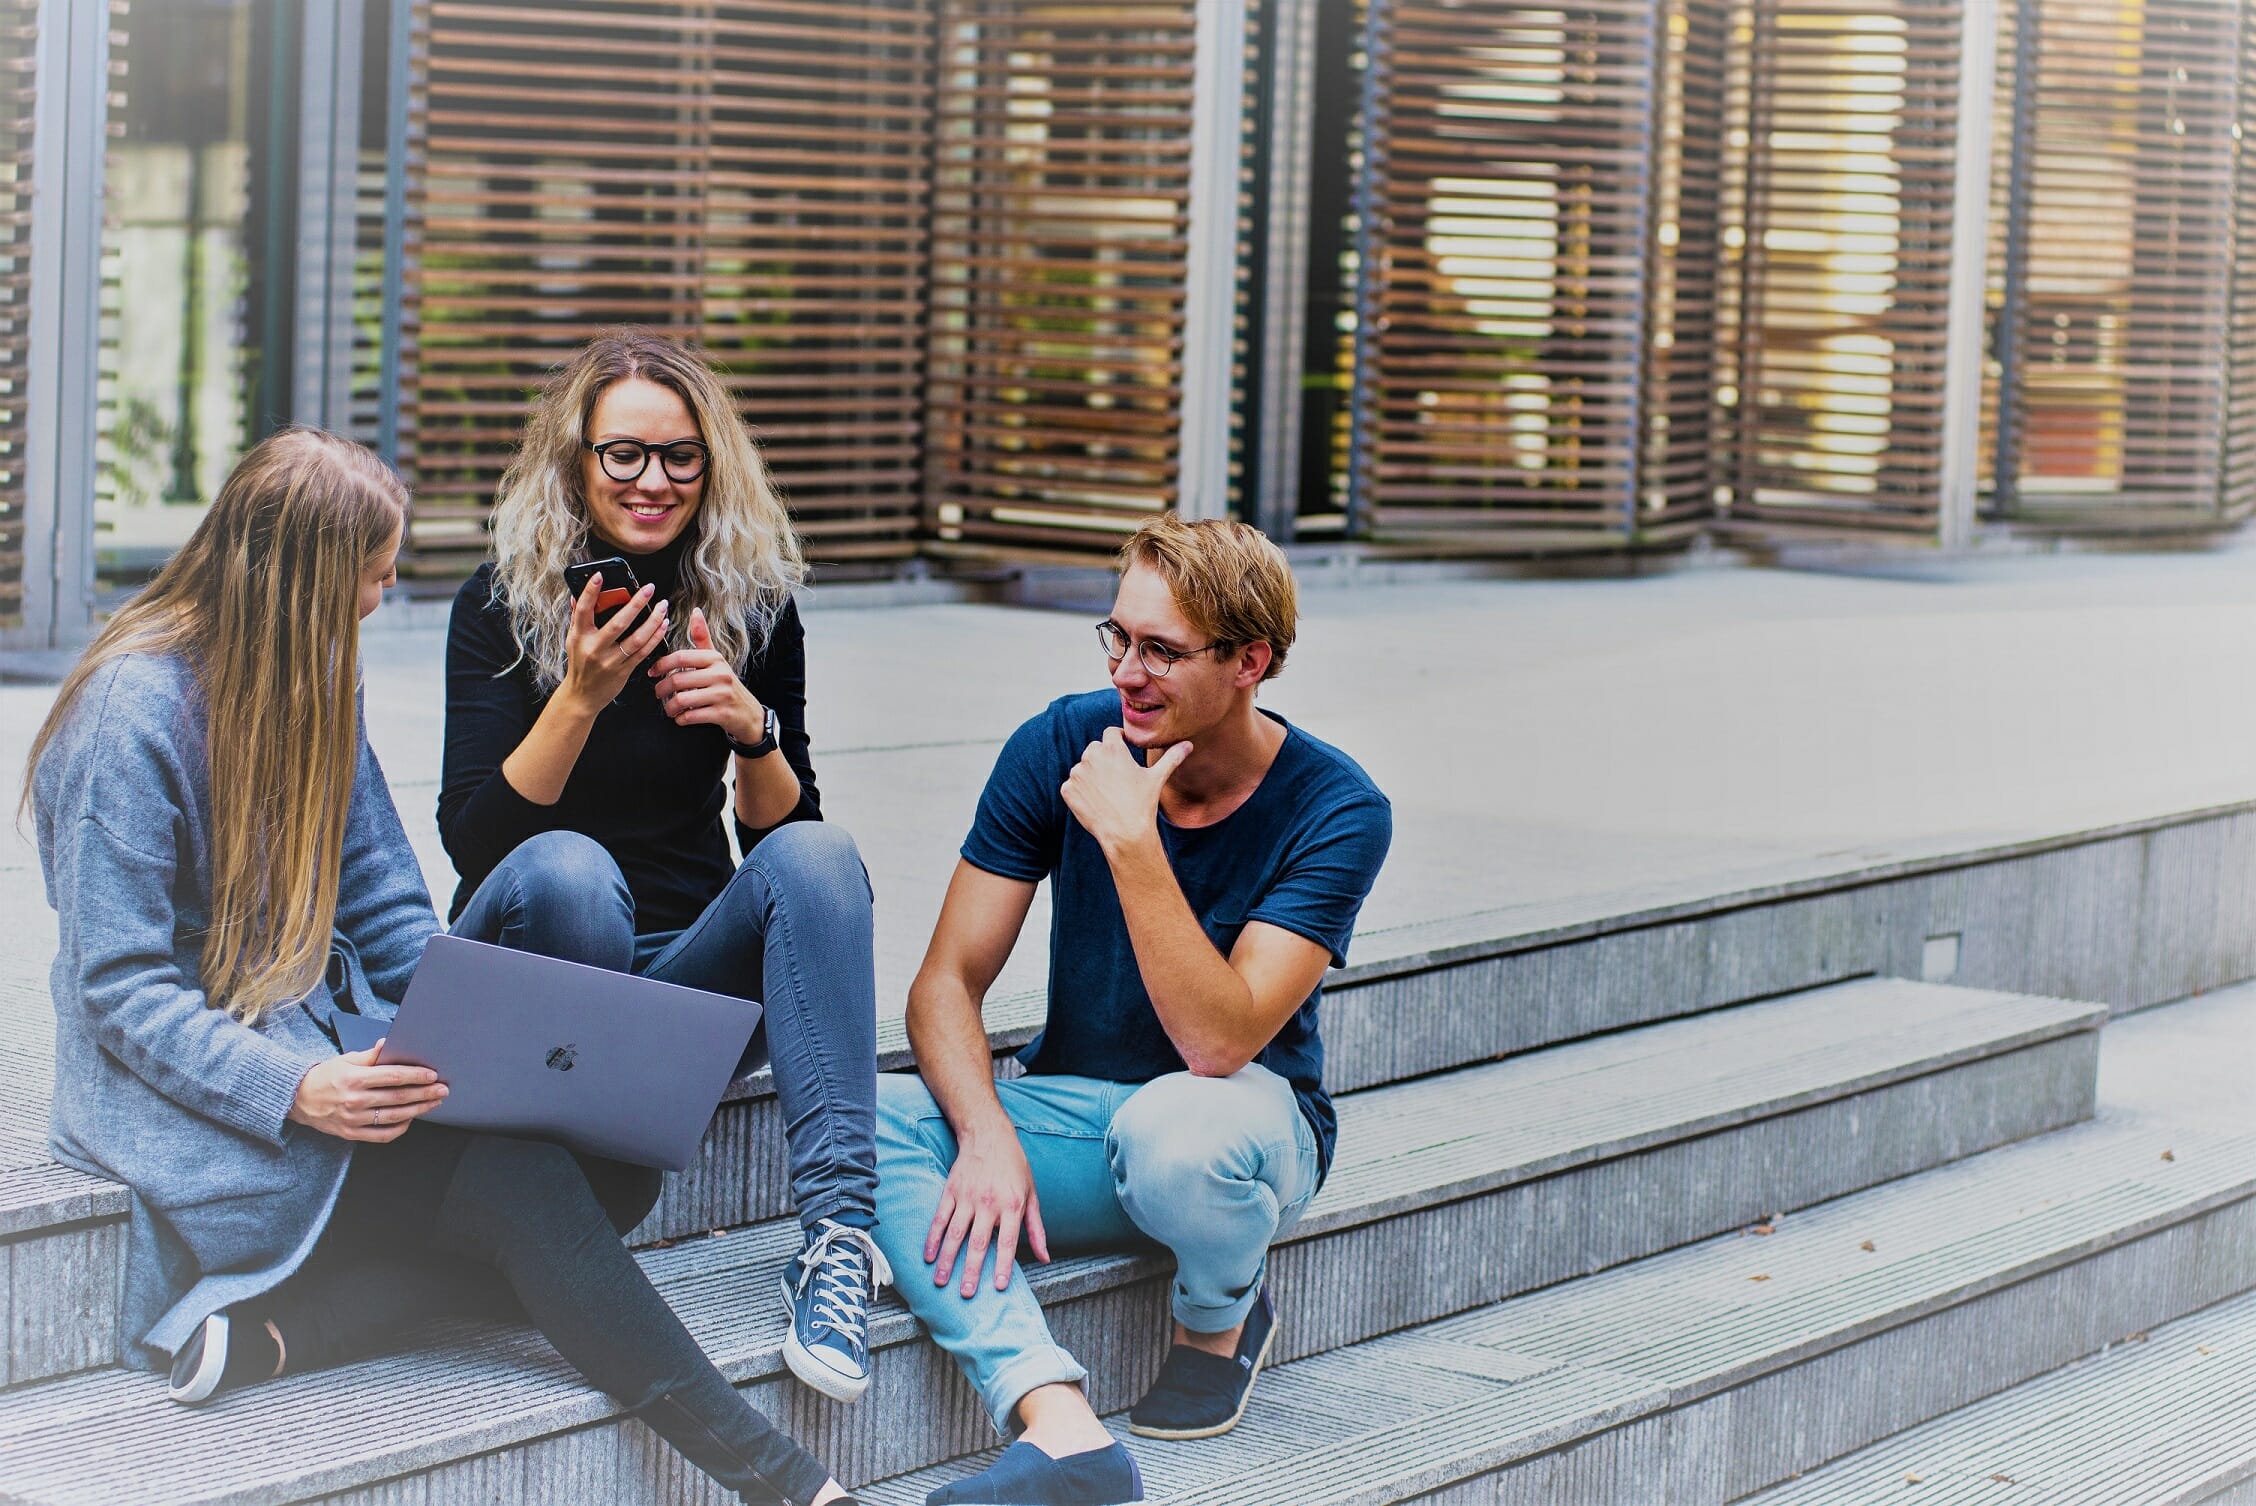 https://www.pexels.com/photo/three-persons-sitting-on-the-stairs-talking-with-each-other-1438072/